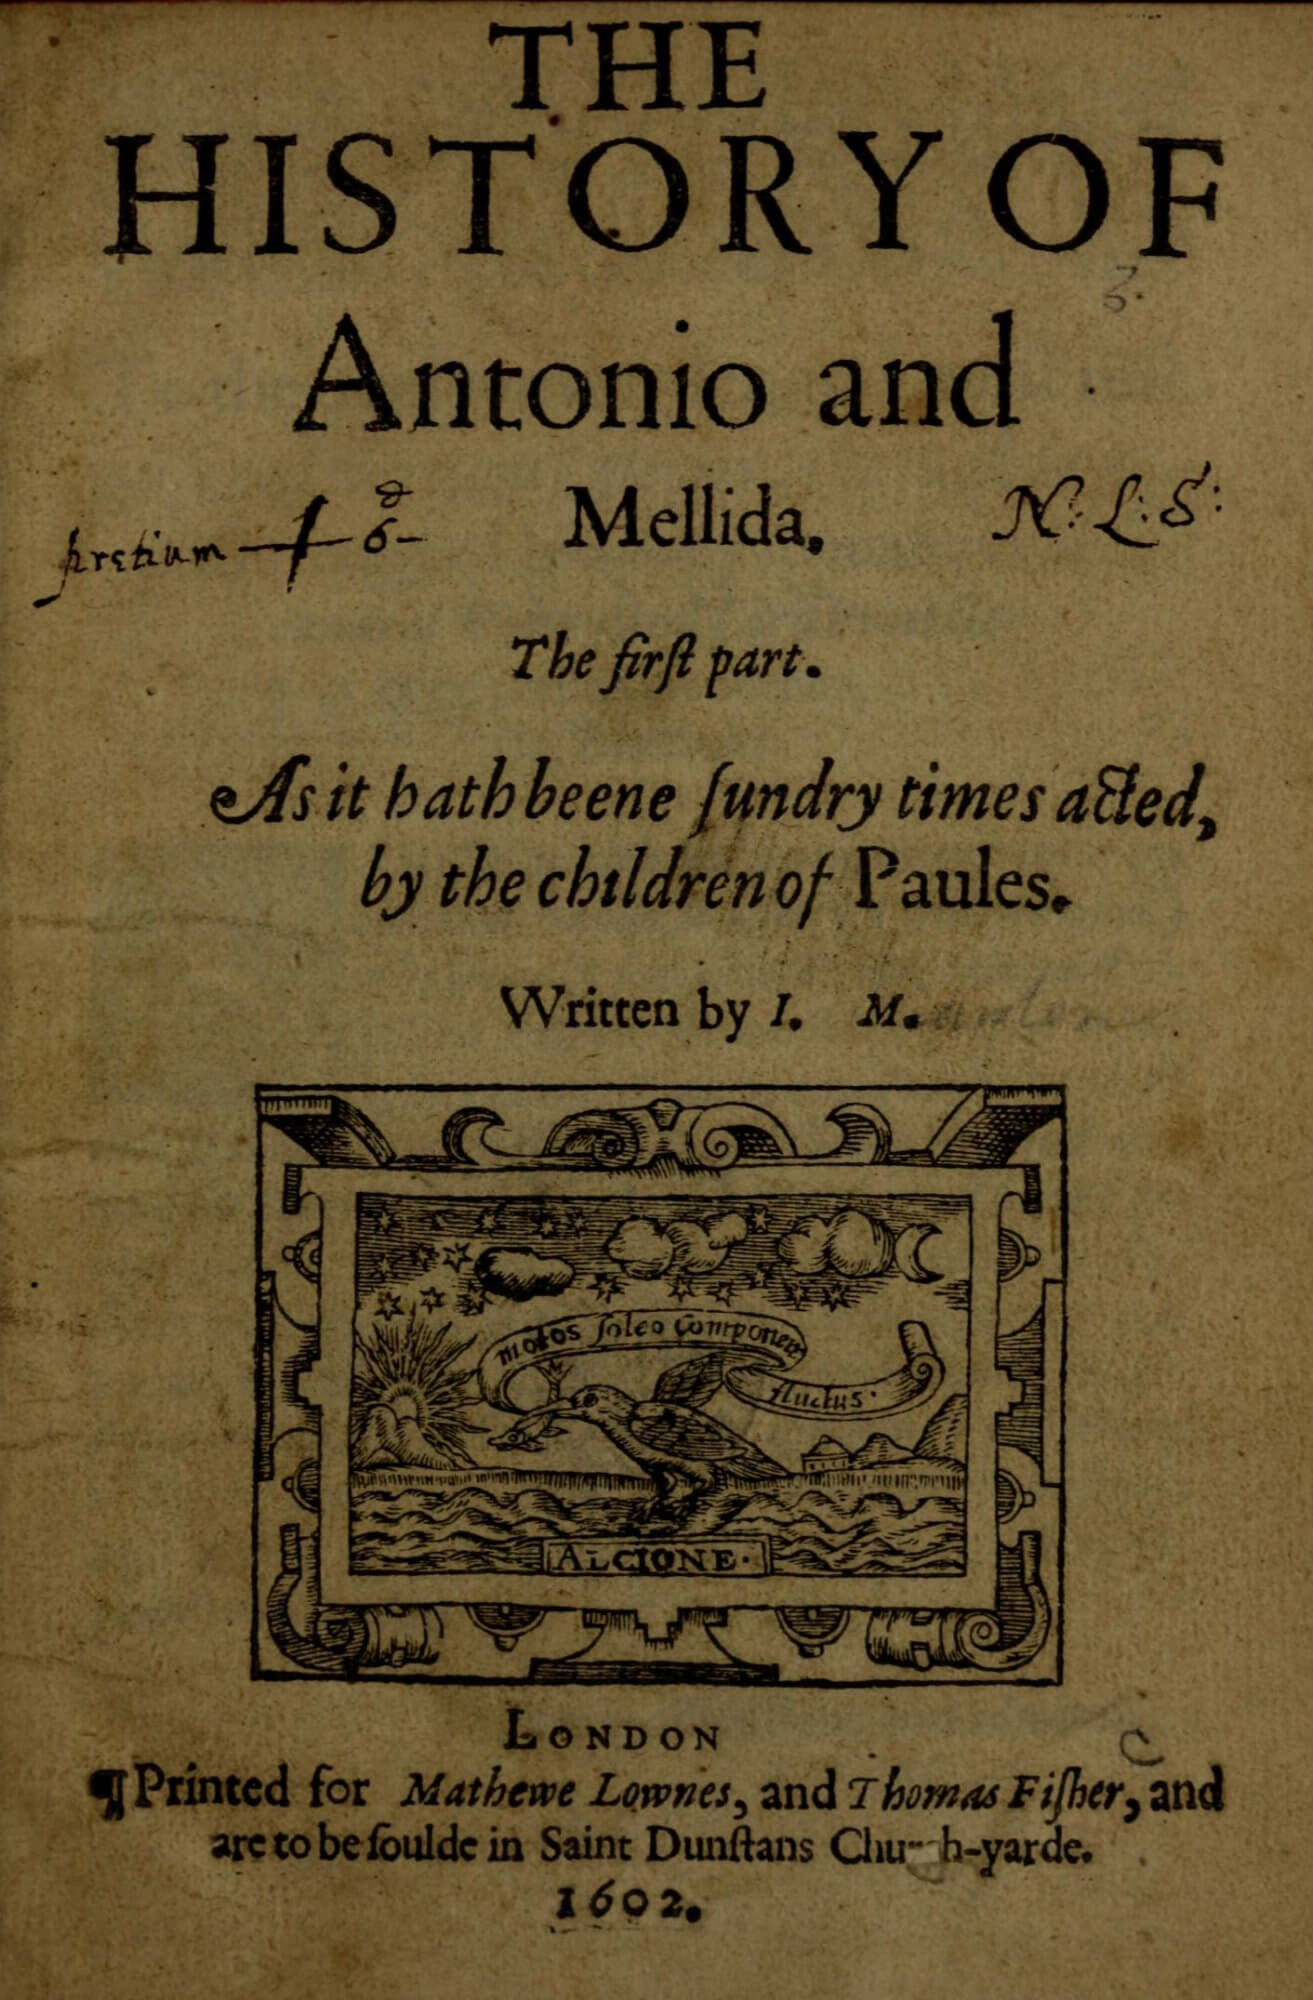 Thomas Fisher's printer's device, shown on this playbook title page, puns on his name by featuring a kingfisher bird.